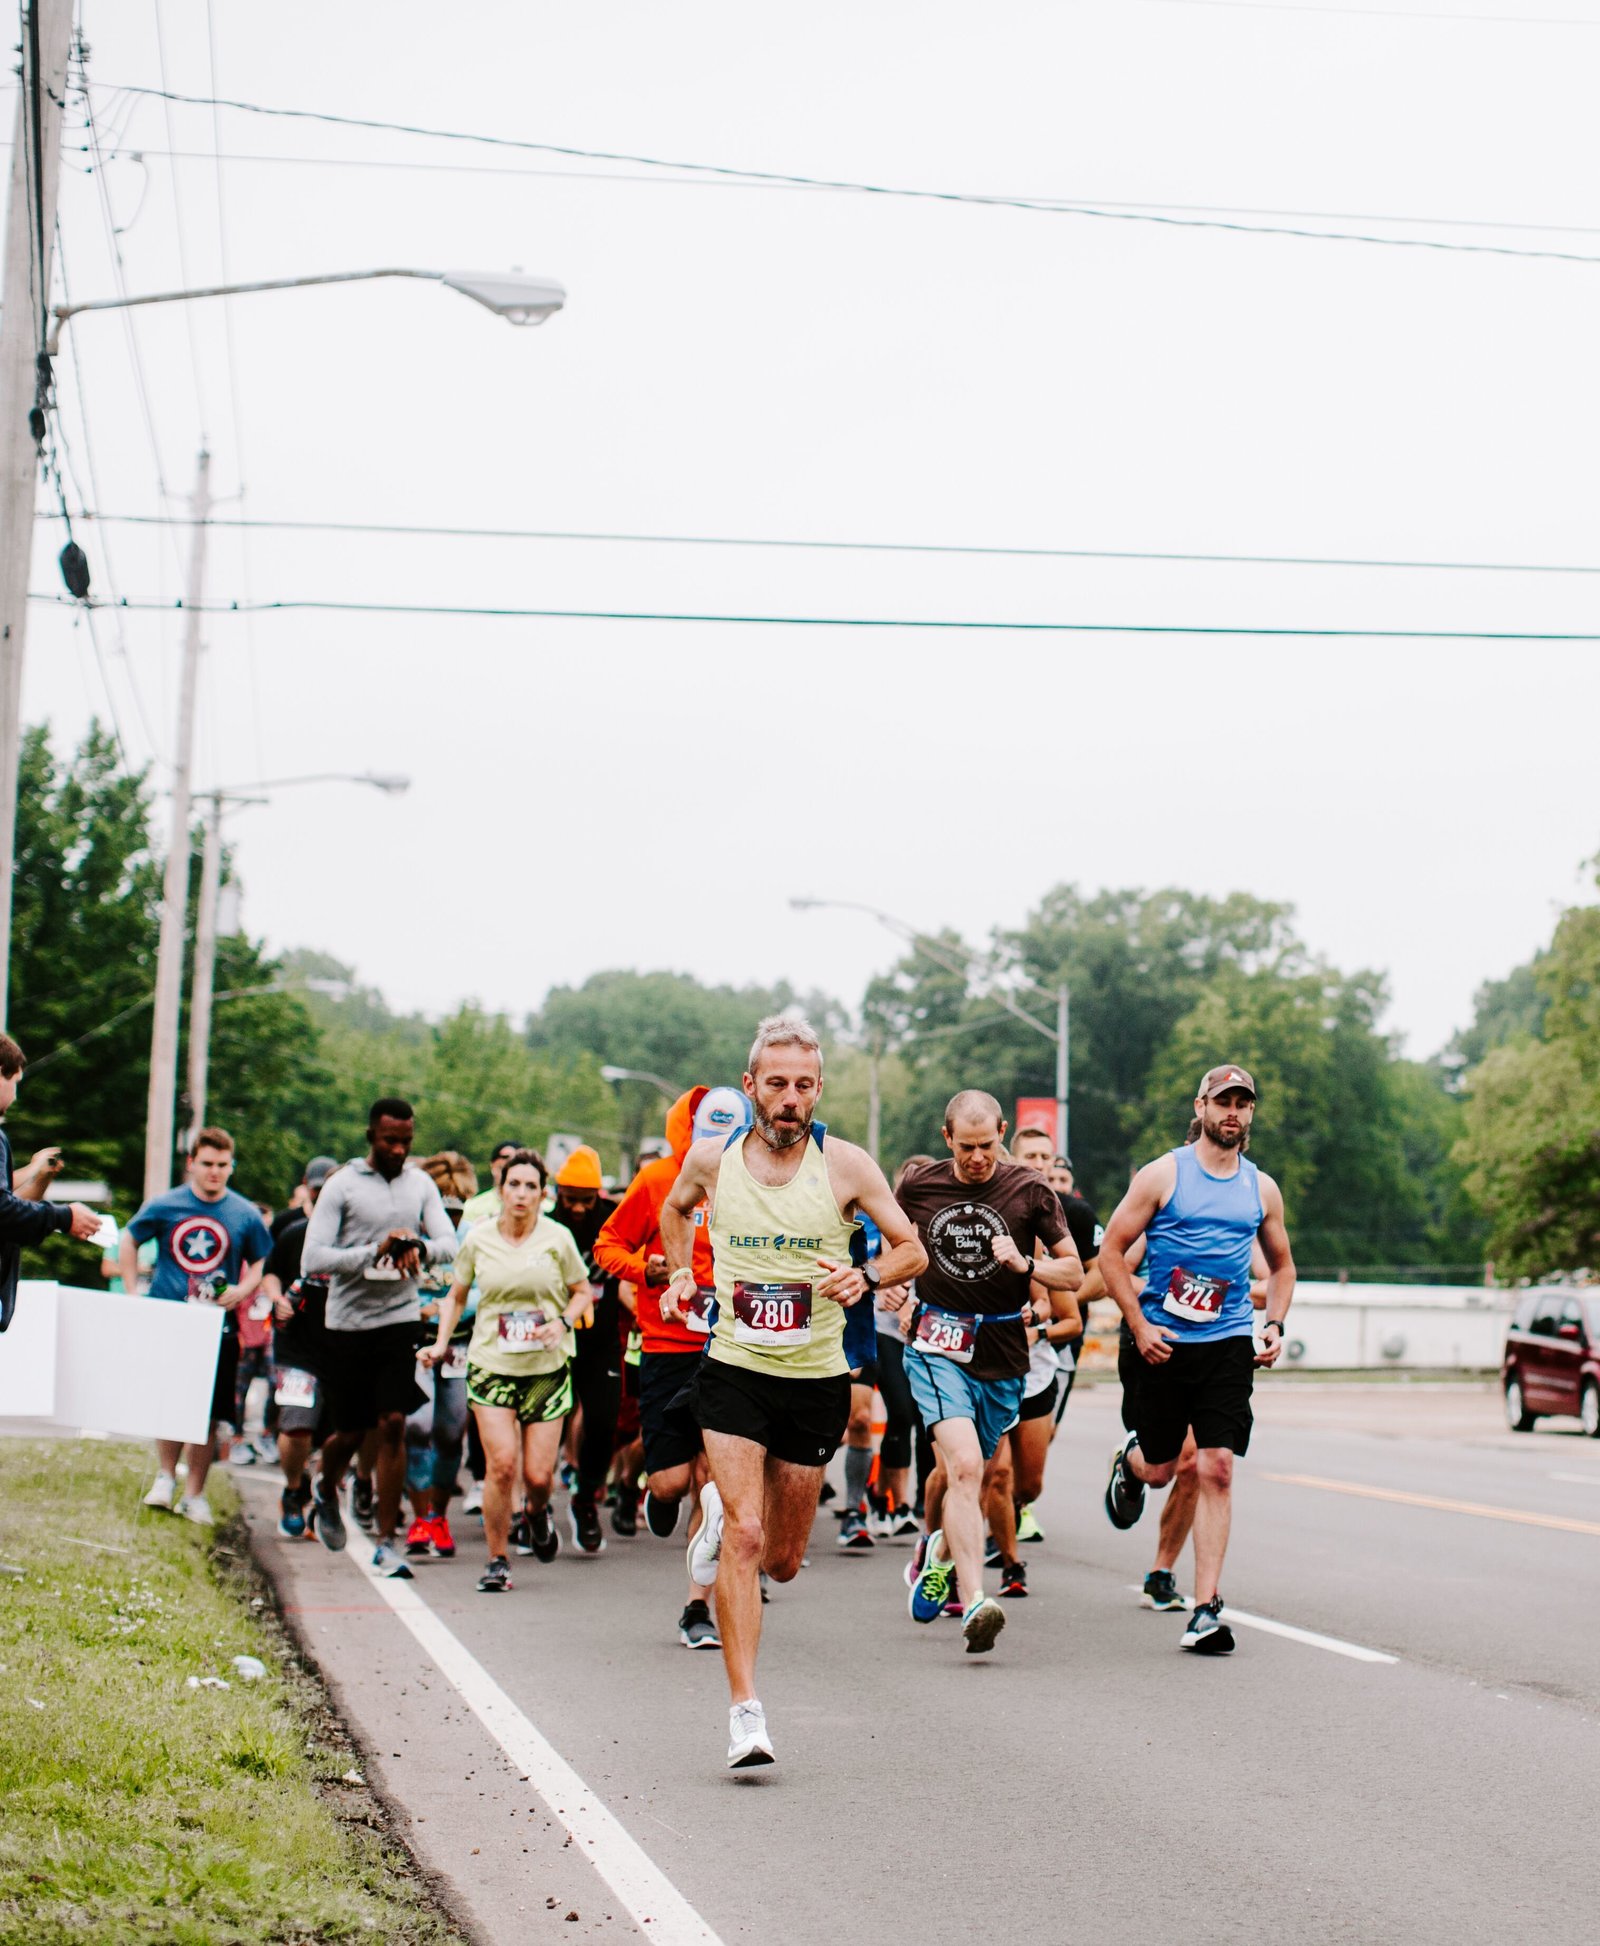 2019 West Tennessee Strawberry Festival - 5k Race - 51